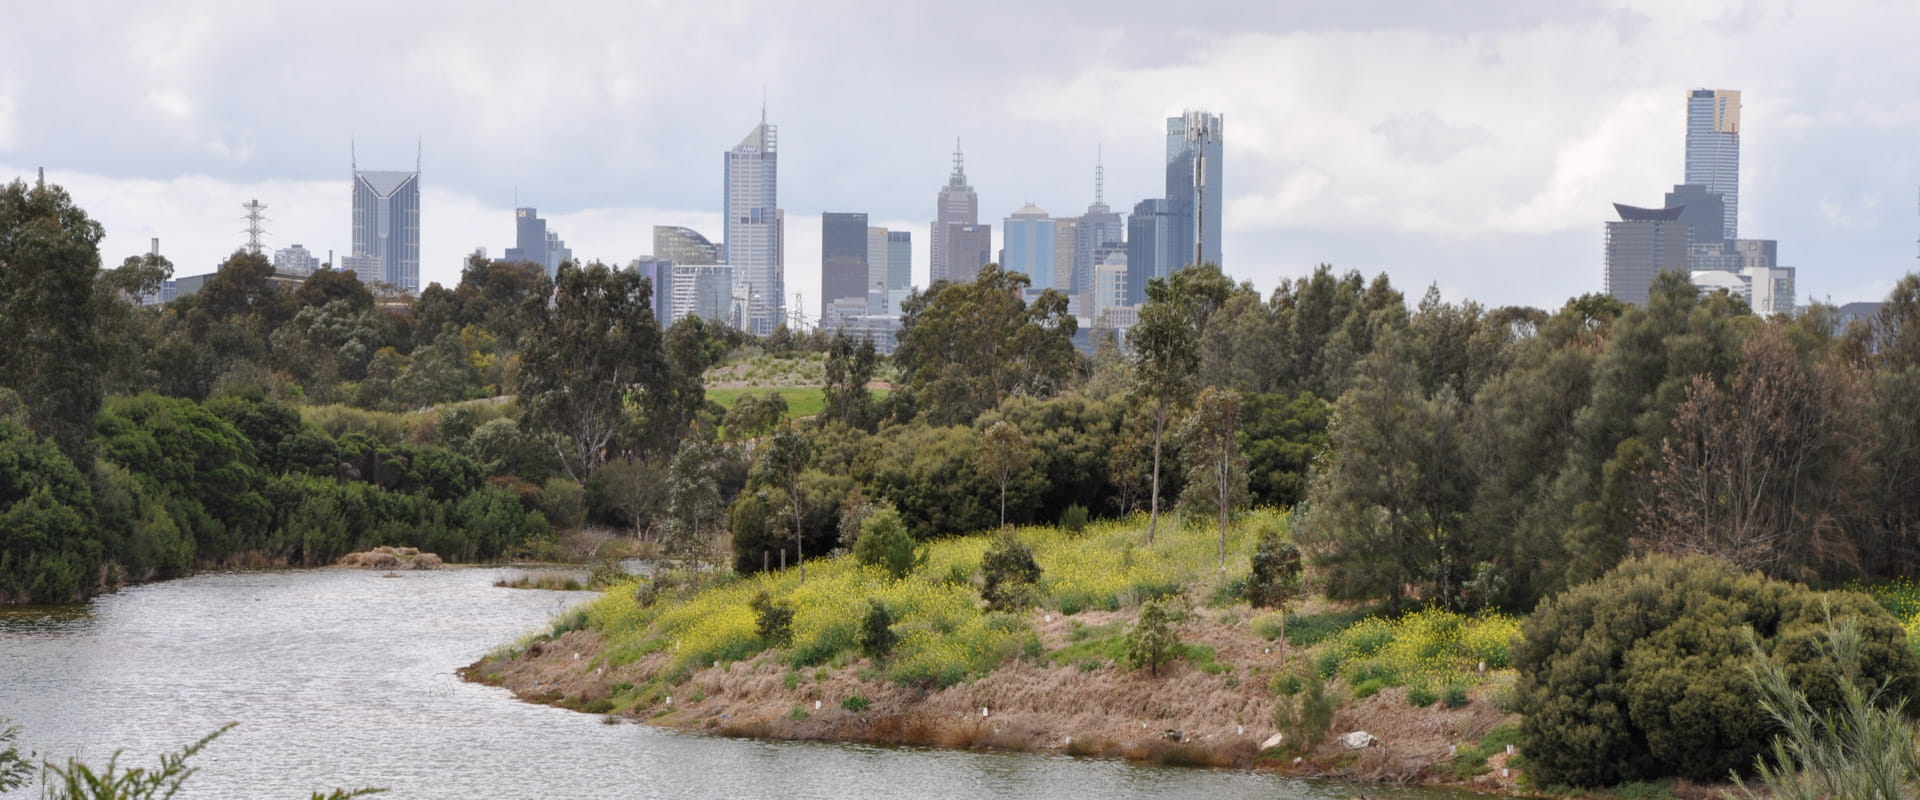 A winding river with green vegetated banks. The tips of Melbourne tall skyscrapers in the background. 